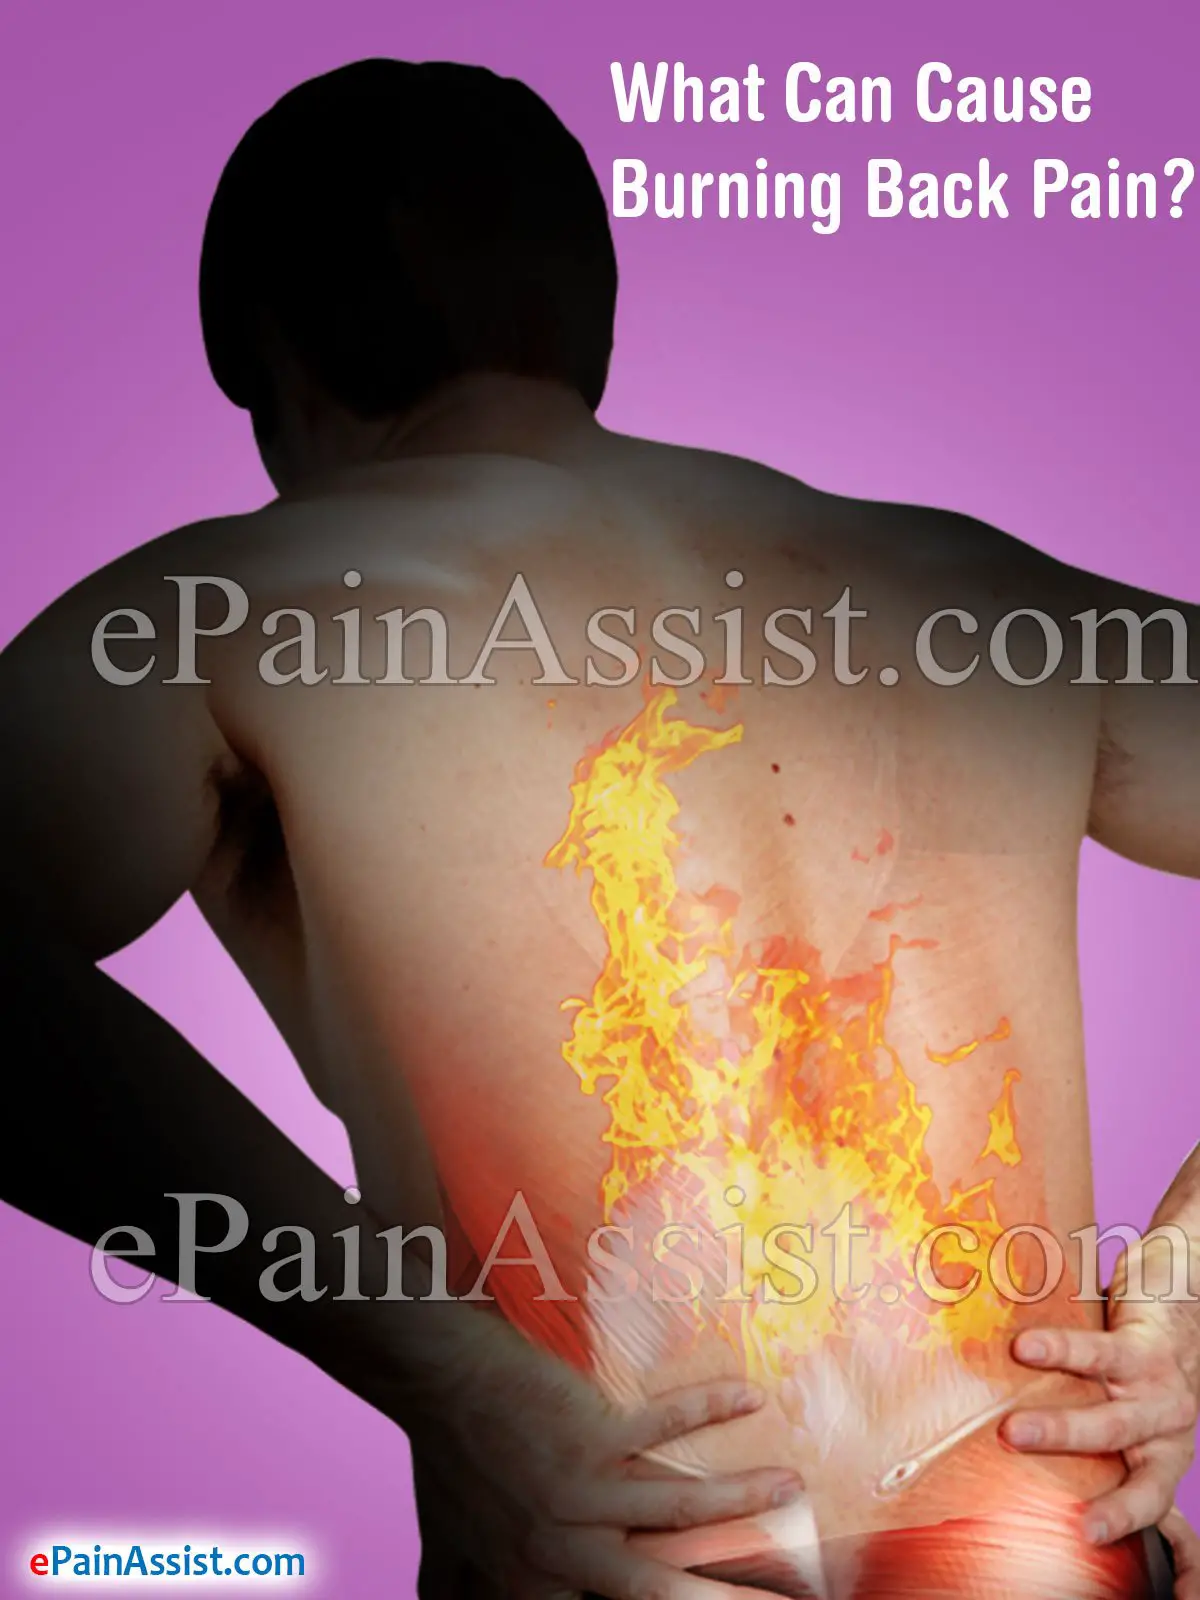 What Can Cause Burning Back Pain?